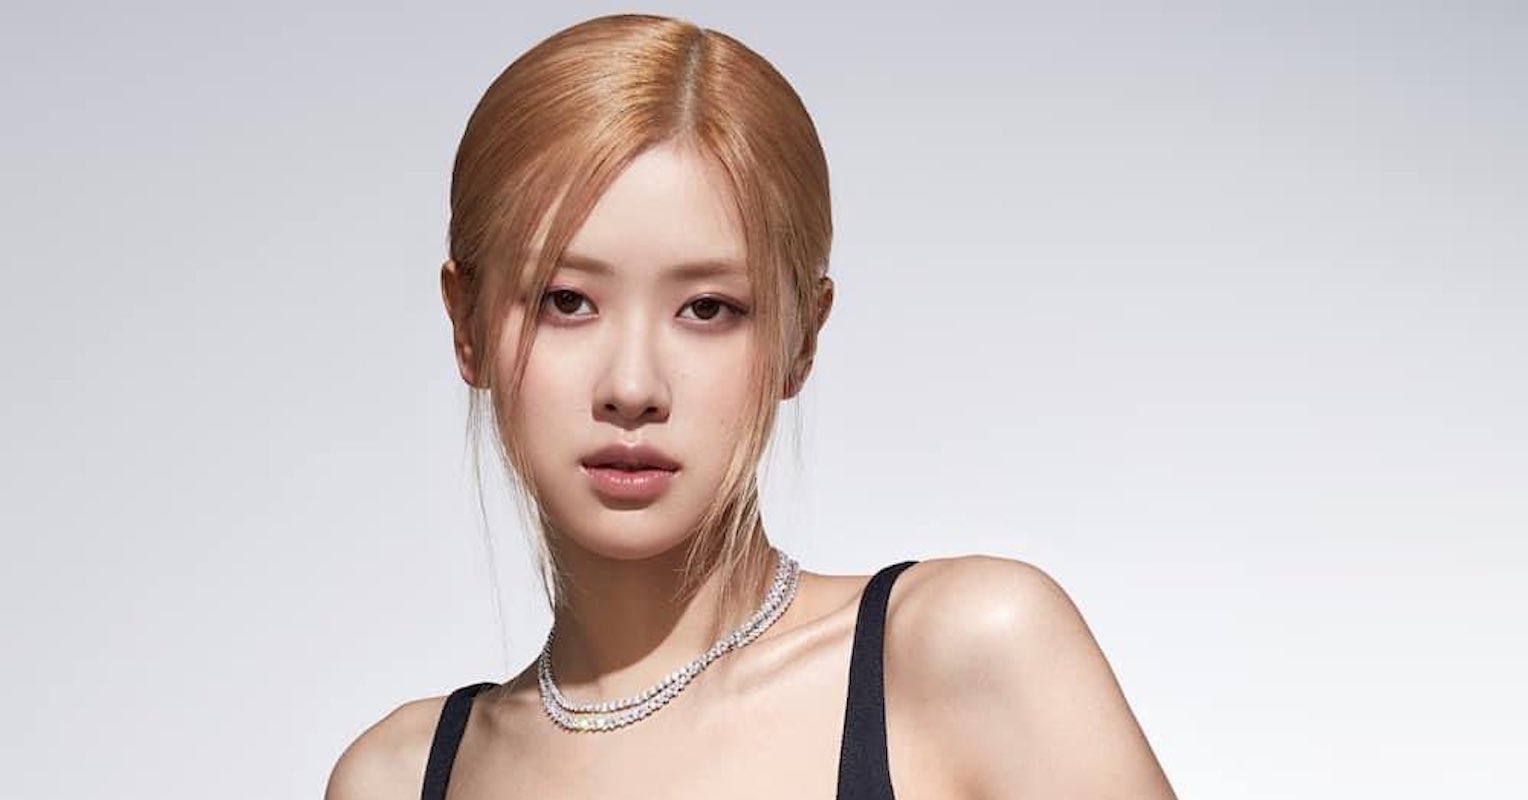 Blackpink's Rosé is the Face of the New Tiffany Lock Campaign